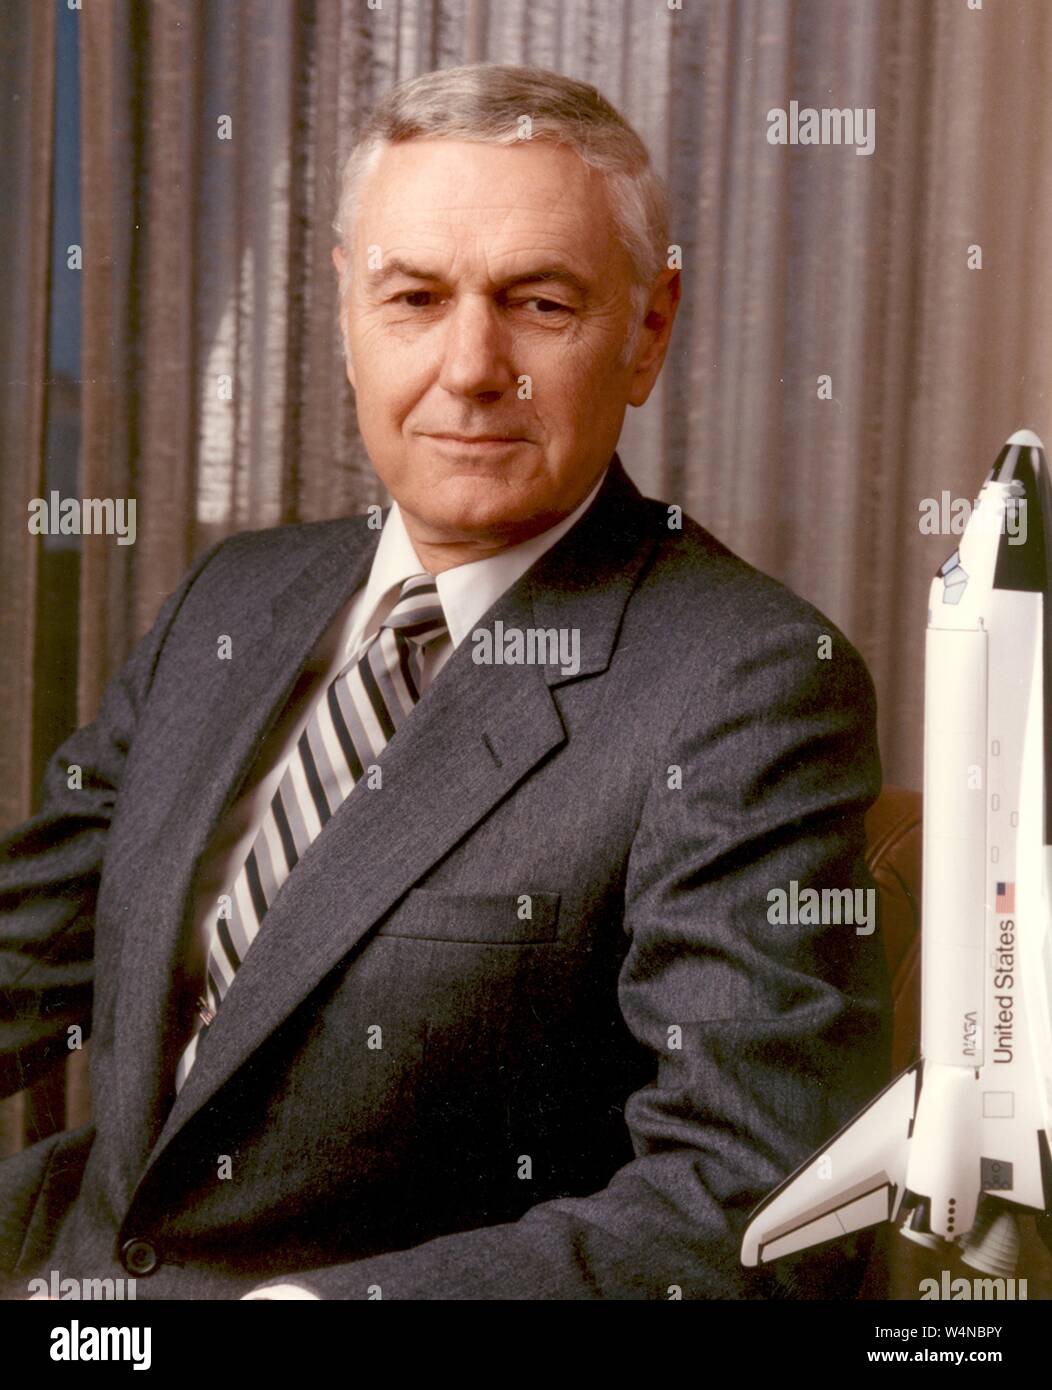 Portrait of James Montgomery Beggs, the 6th Administrator of NASA from Pittsburgh, Pennsylvania, 2002. Image courtesy National Aeronautics and Space Administration (NASA). () Stock Photo